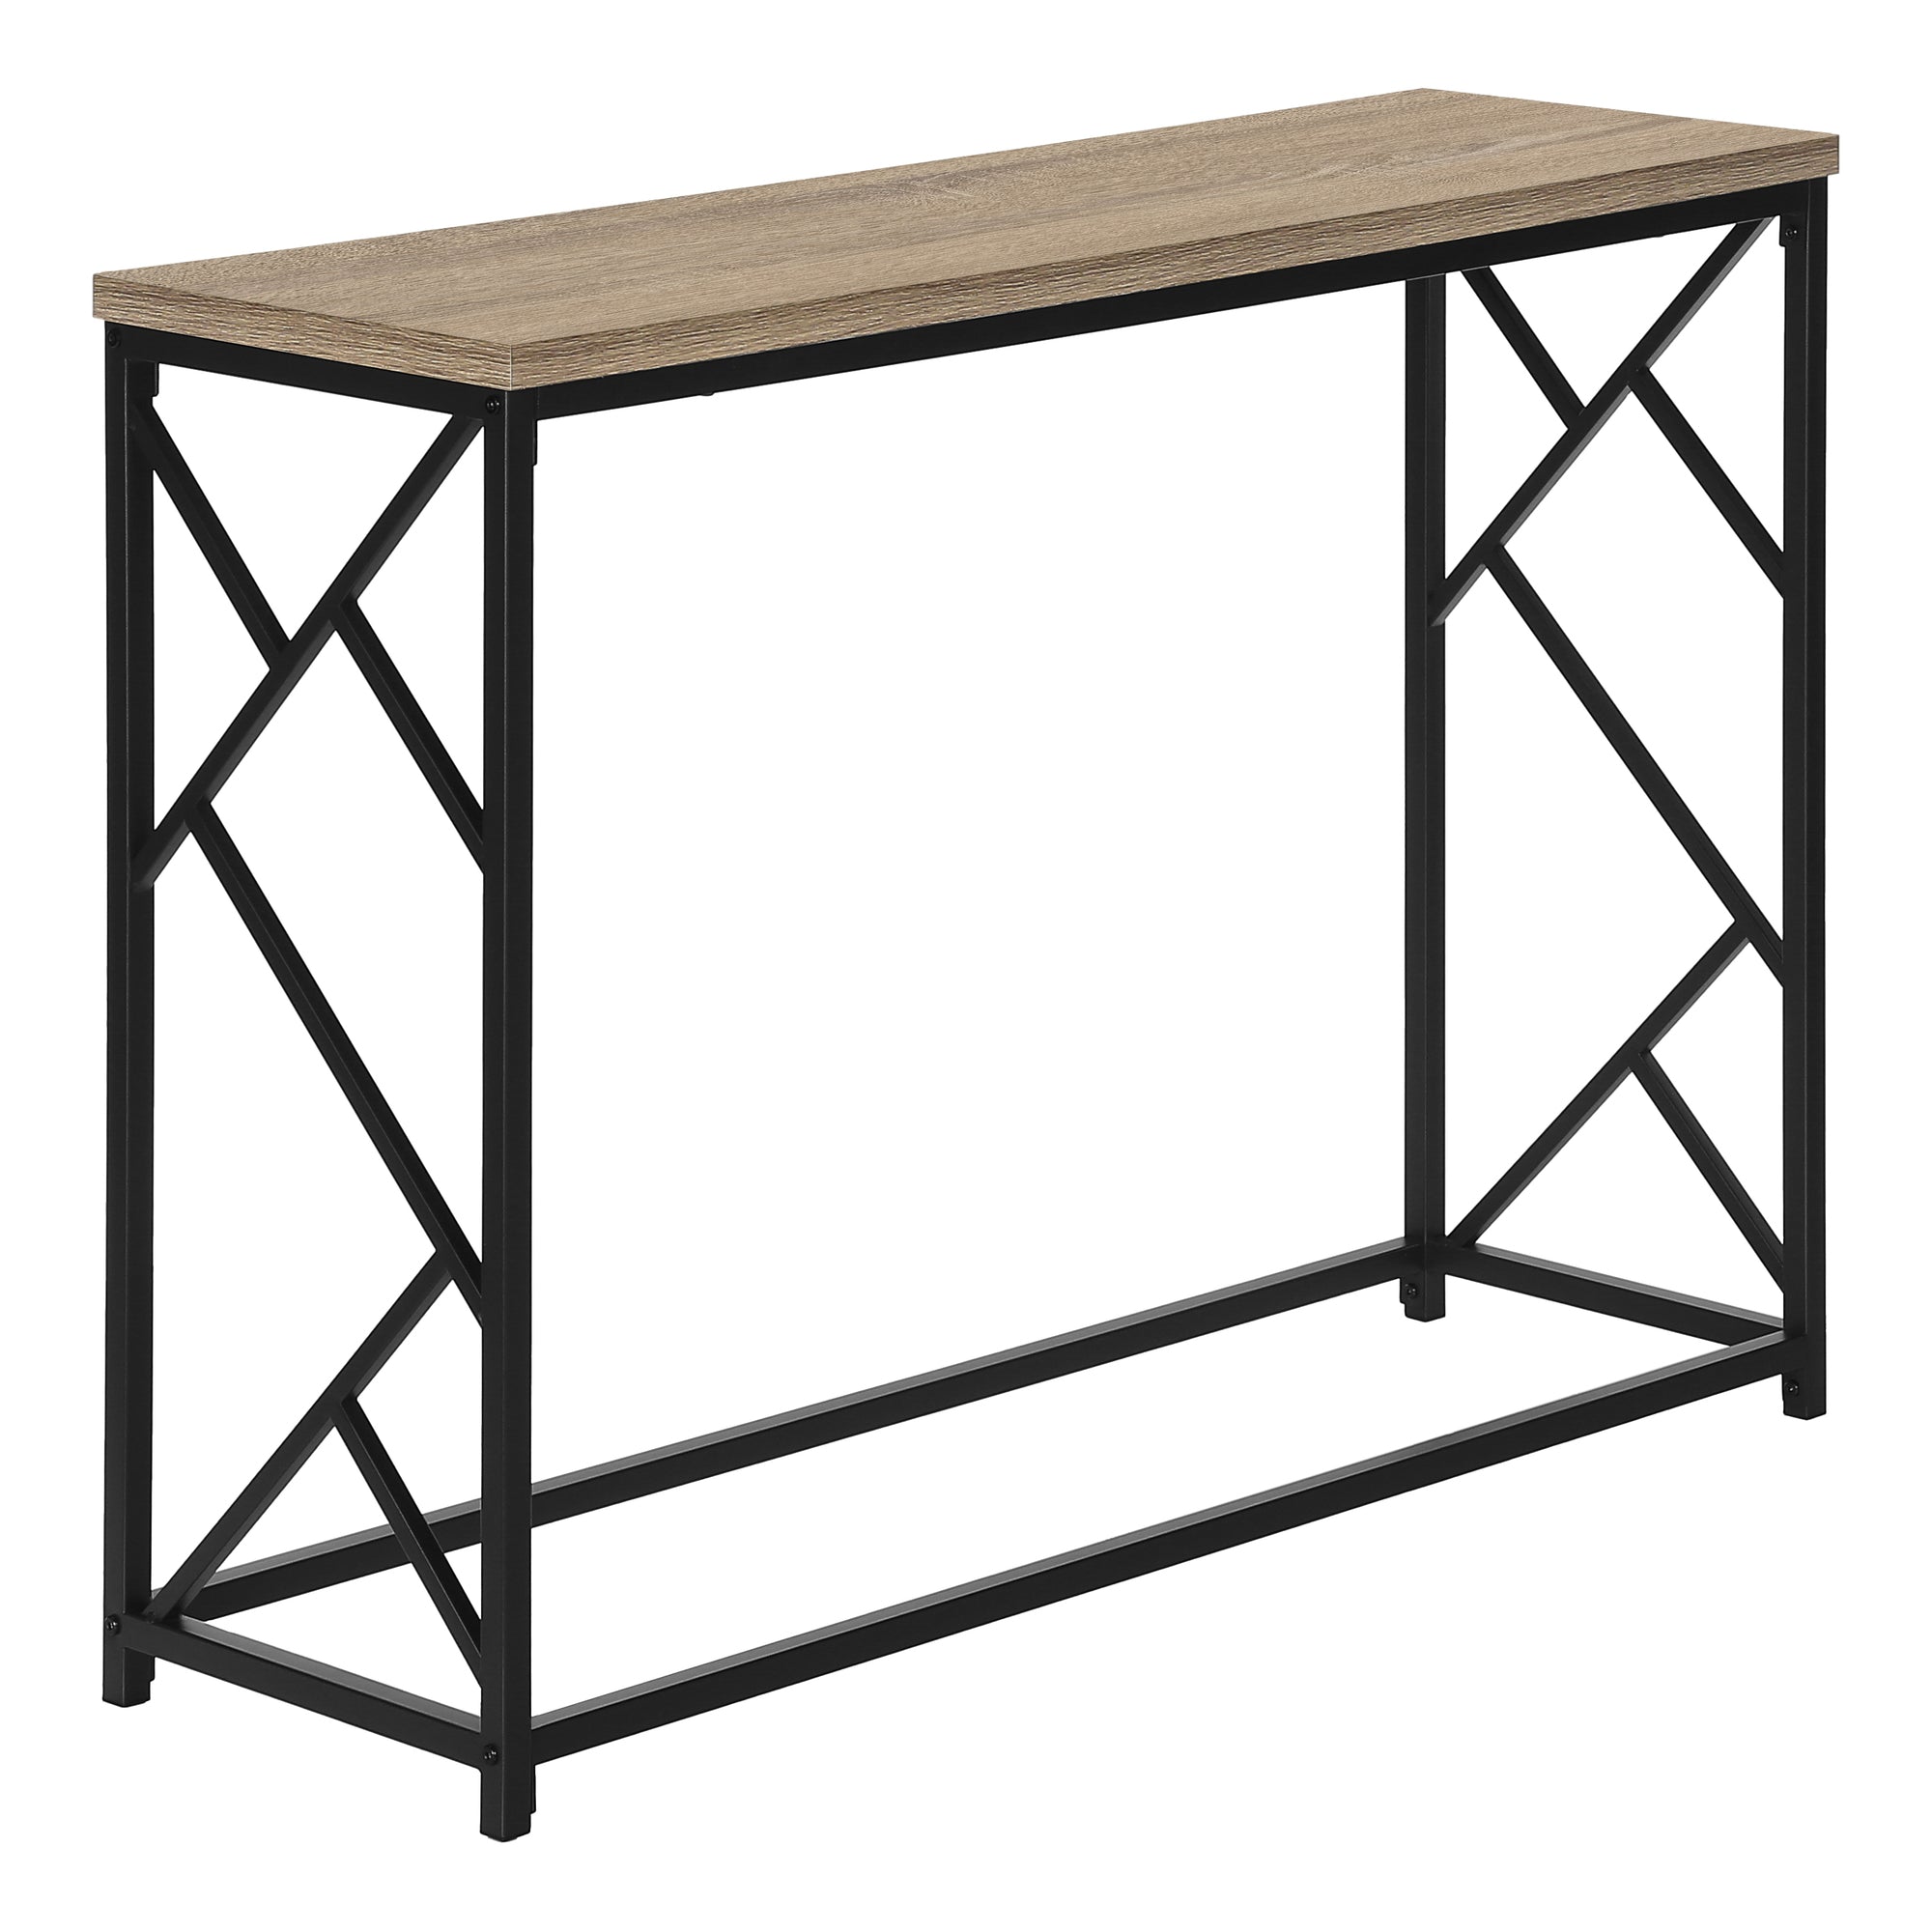 ACCENT TABLE - 44"L / GREY / BLACK METAL HALL CONSOLE